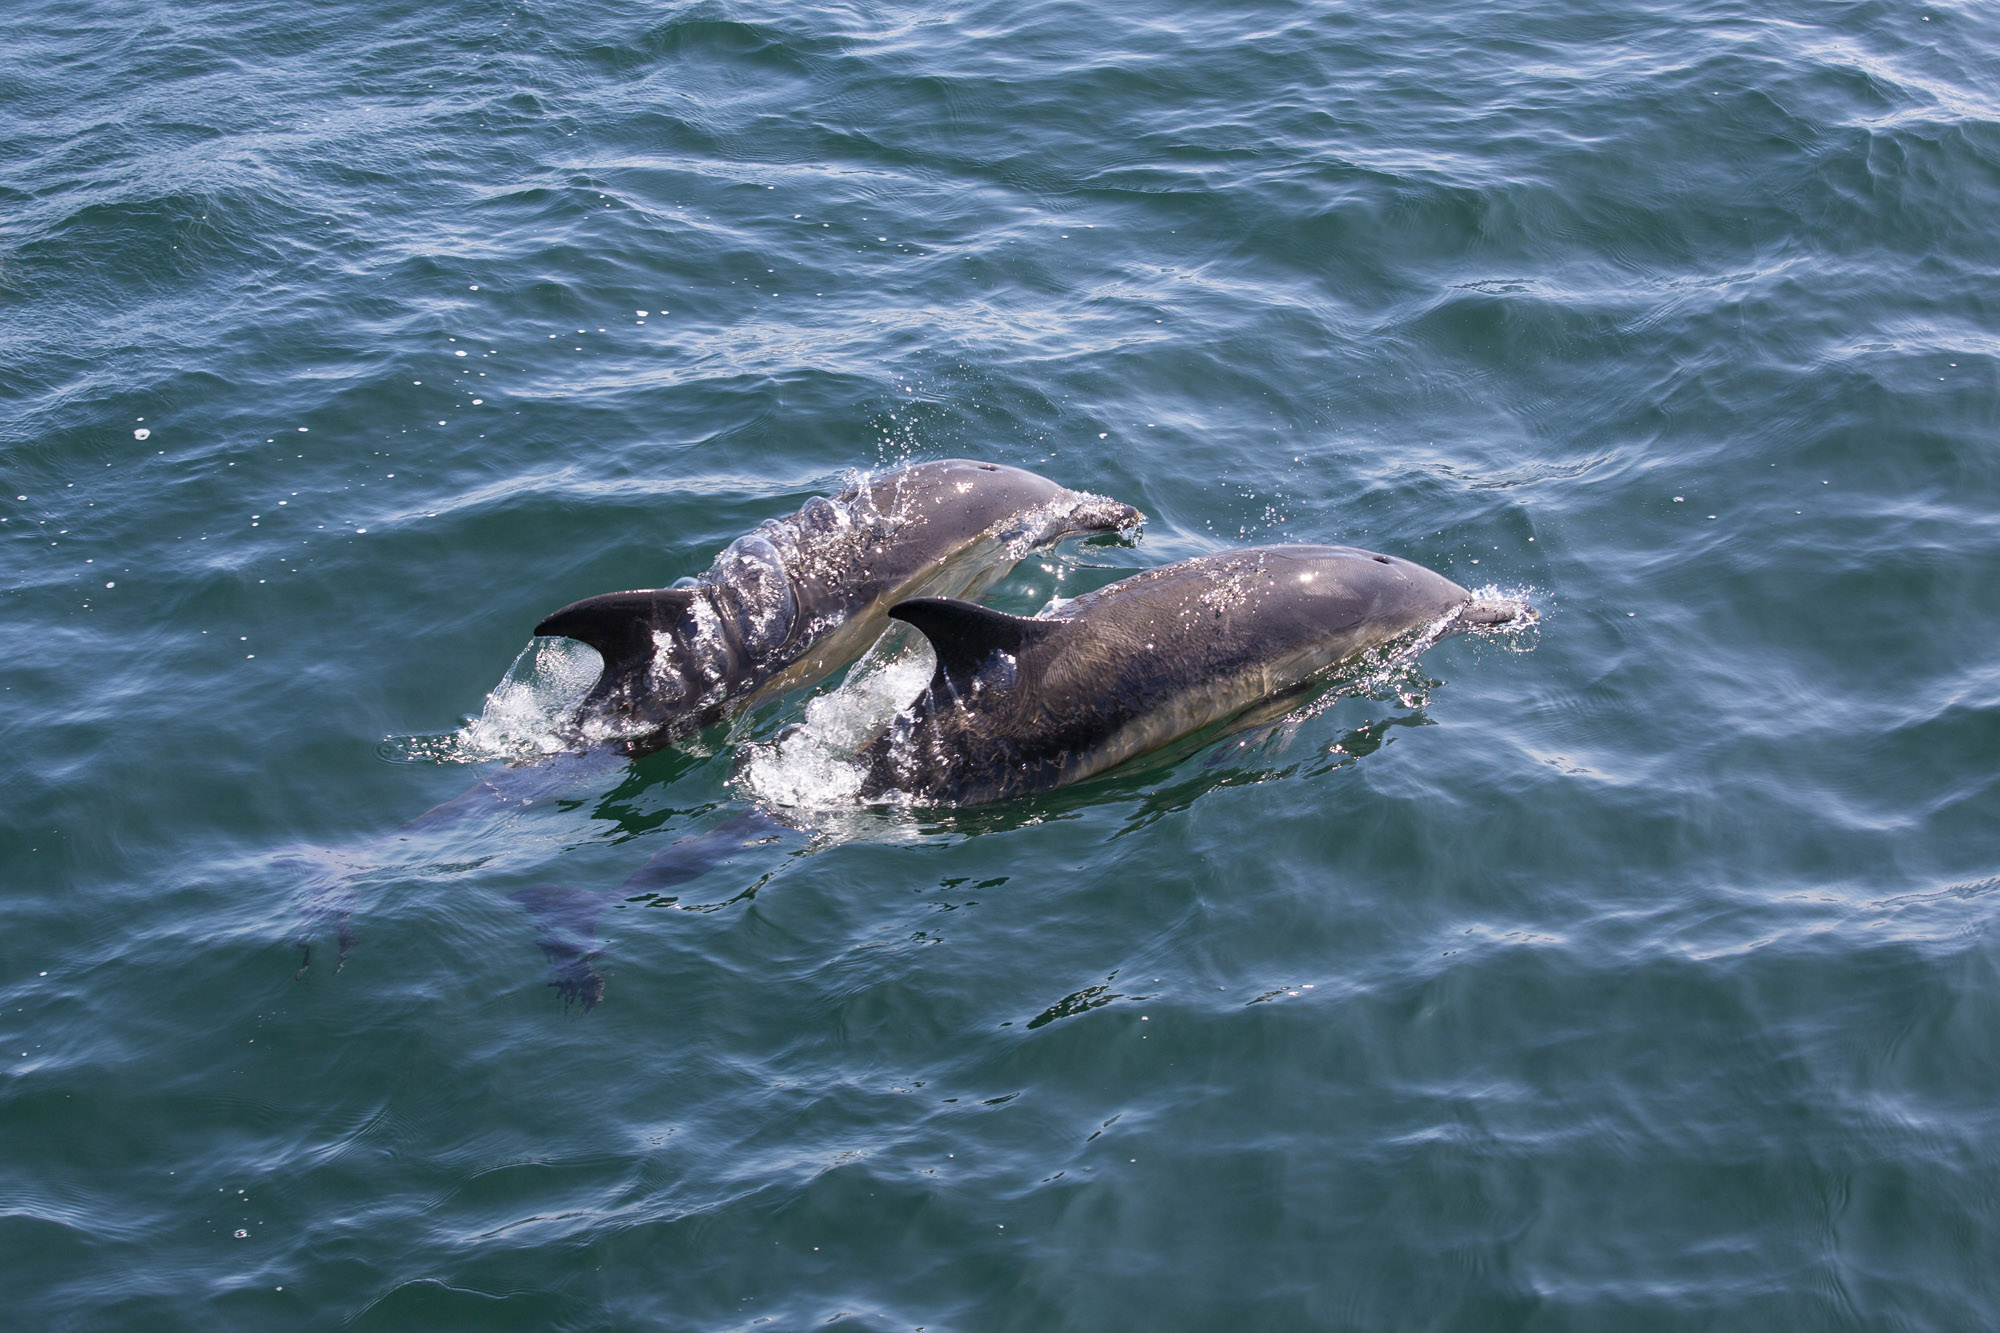 Common-Dolphins-spotted-in-the-Treshnish-Isles-newly-acquired-by-the-National-Trust-for-Scotland-2ykpnzh42